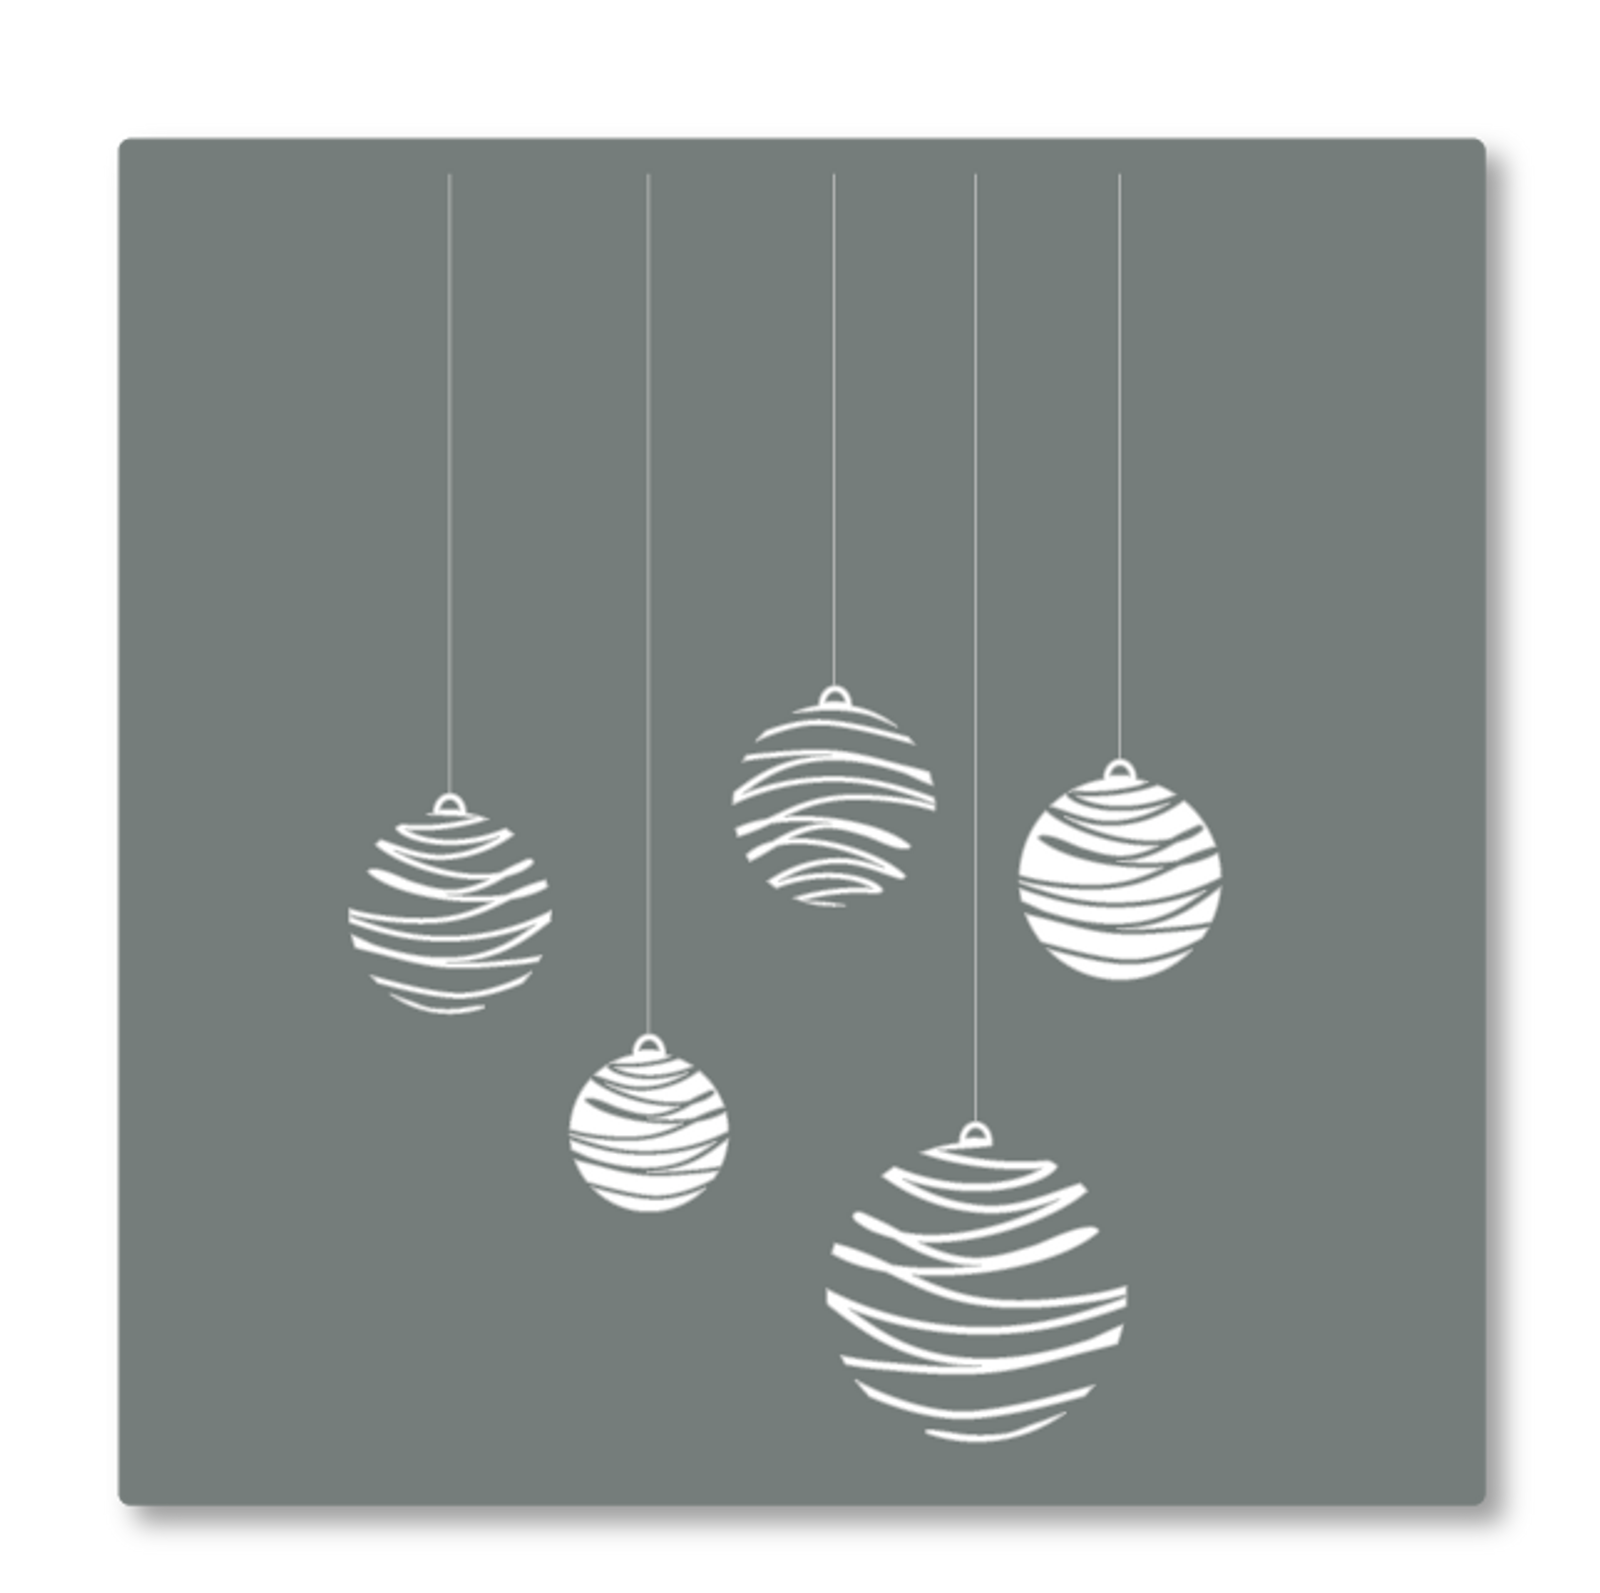 Delightful Christmas baubles, modern in style. Use these to create a pop of colour in your Christmas decorations. Shown as white on grey.